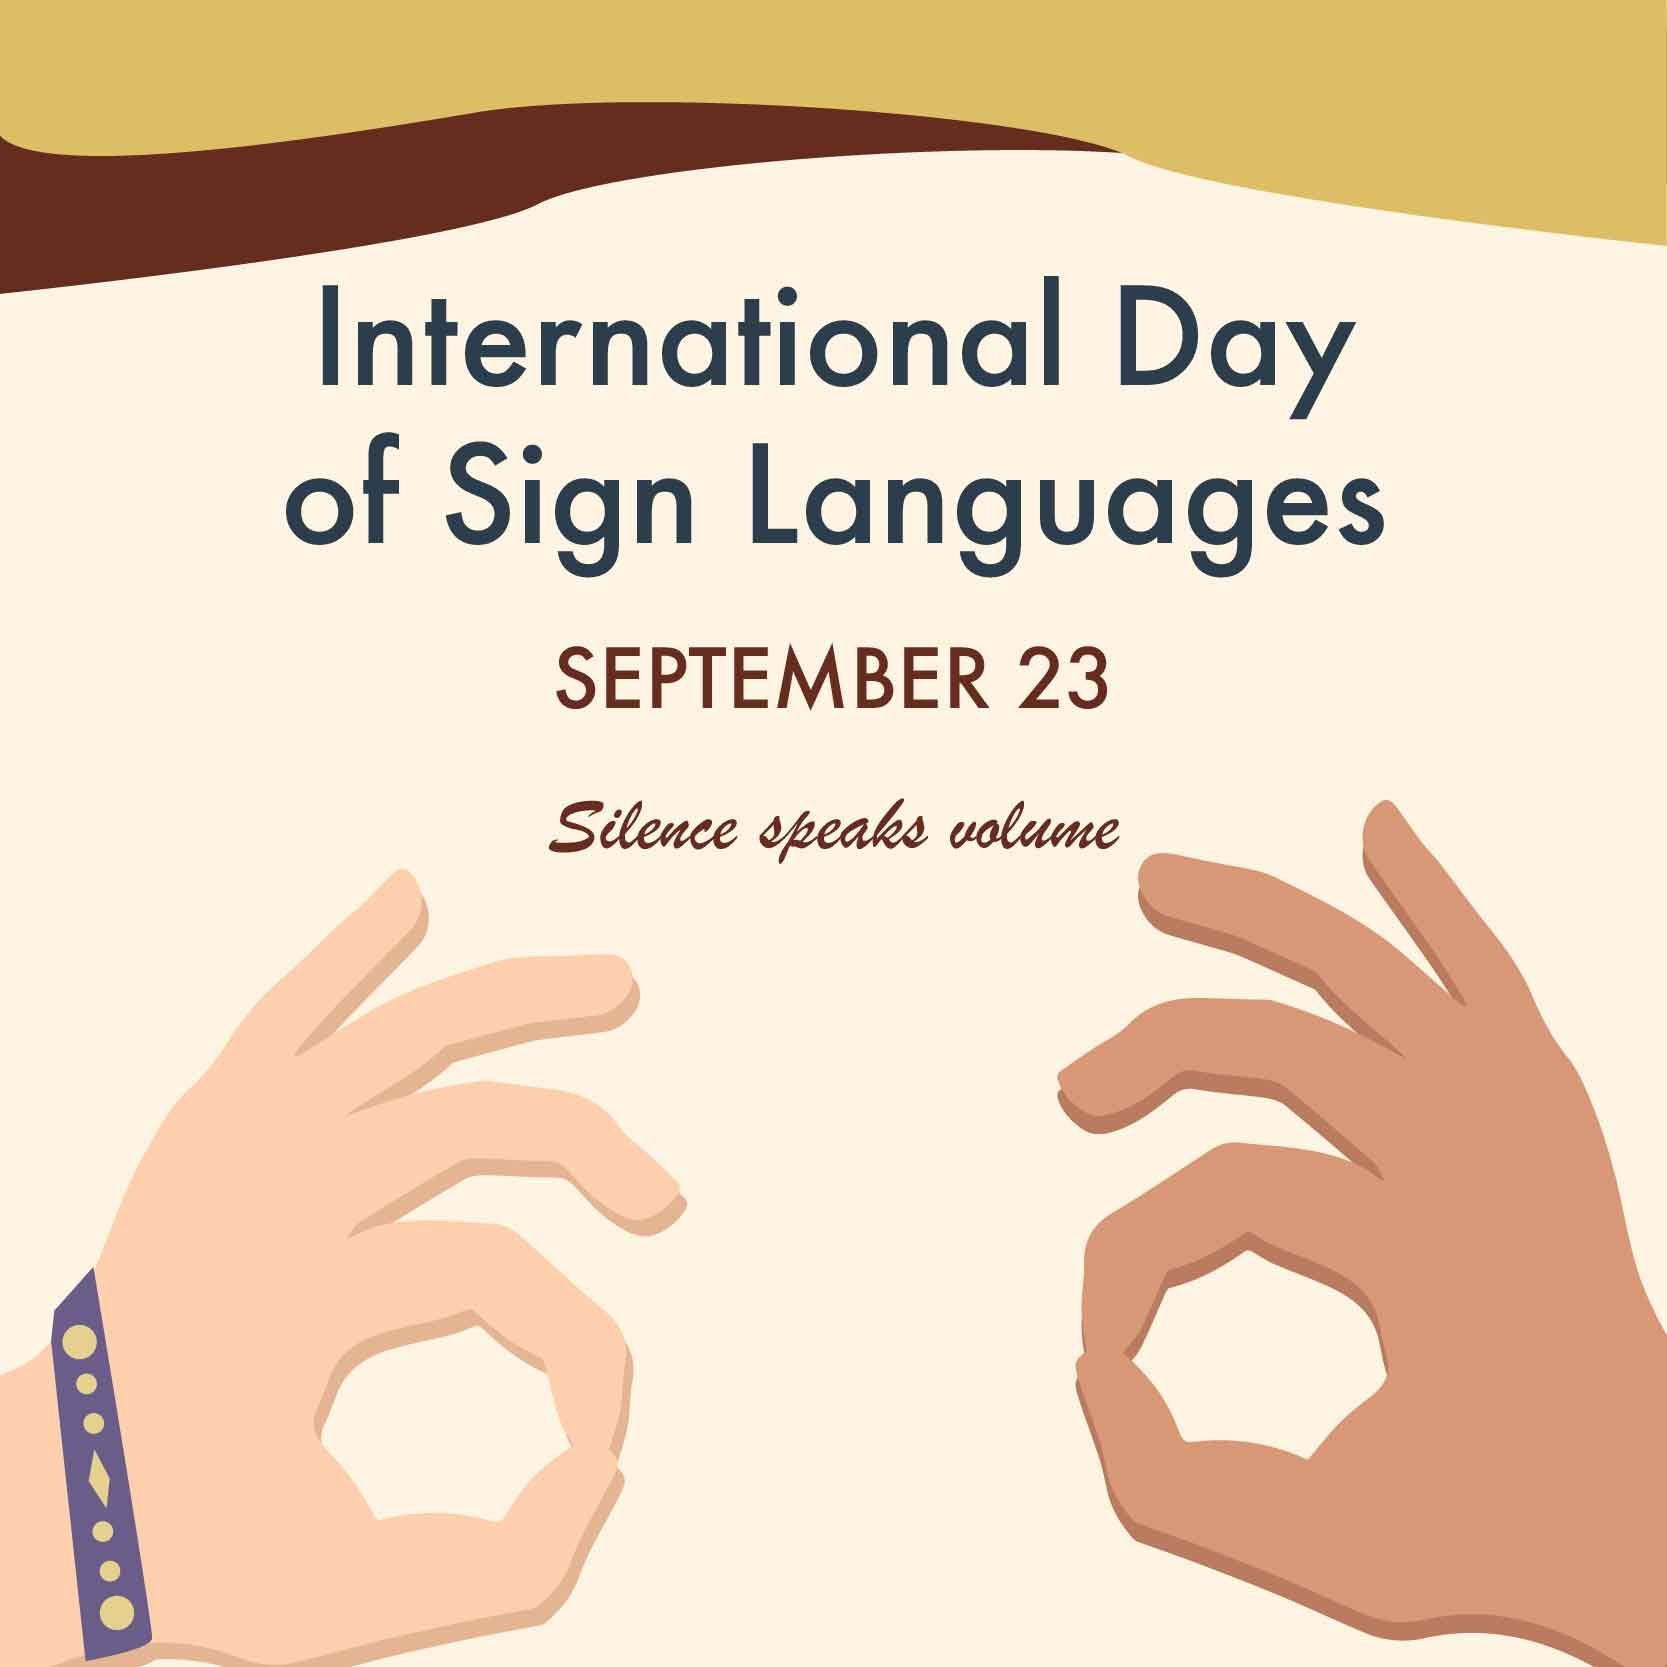 International Day of Sign Languages Whatsapp Post in Illustrator, PSD, EPS, SVG, JPG, PNG